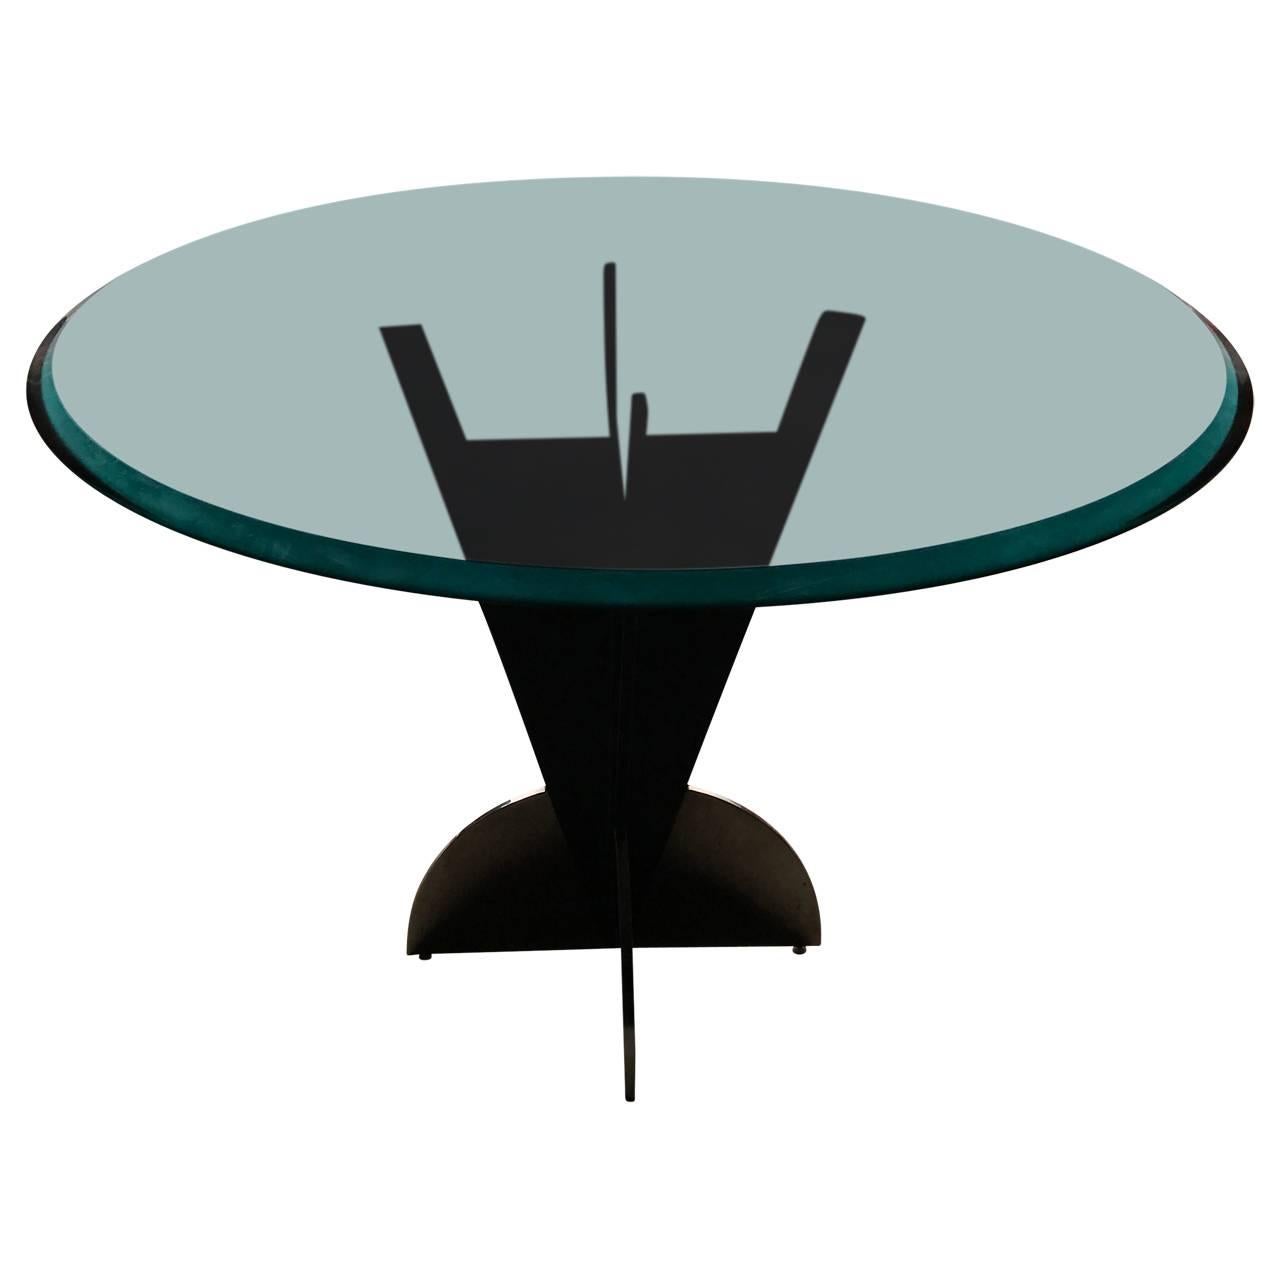 20th Century American Modern Steel Dining Table With Round Tinted Glass Top 